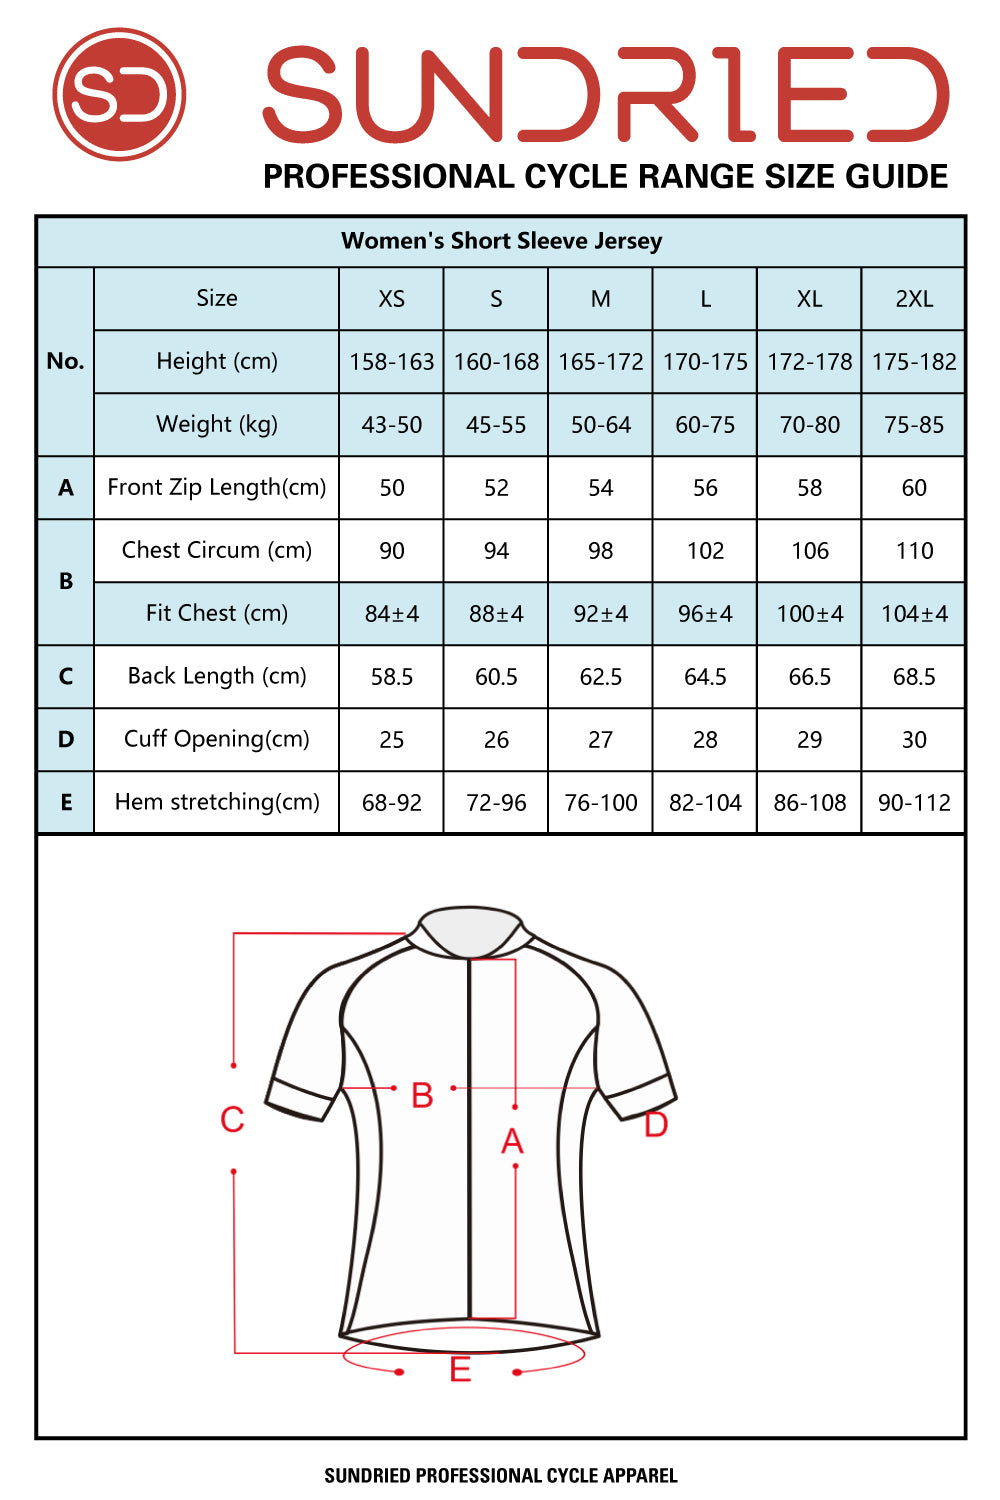 Women's Short Sleeve Cycle Jersey Size Chart